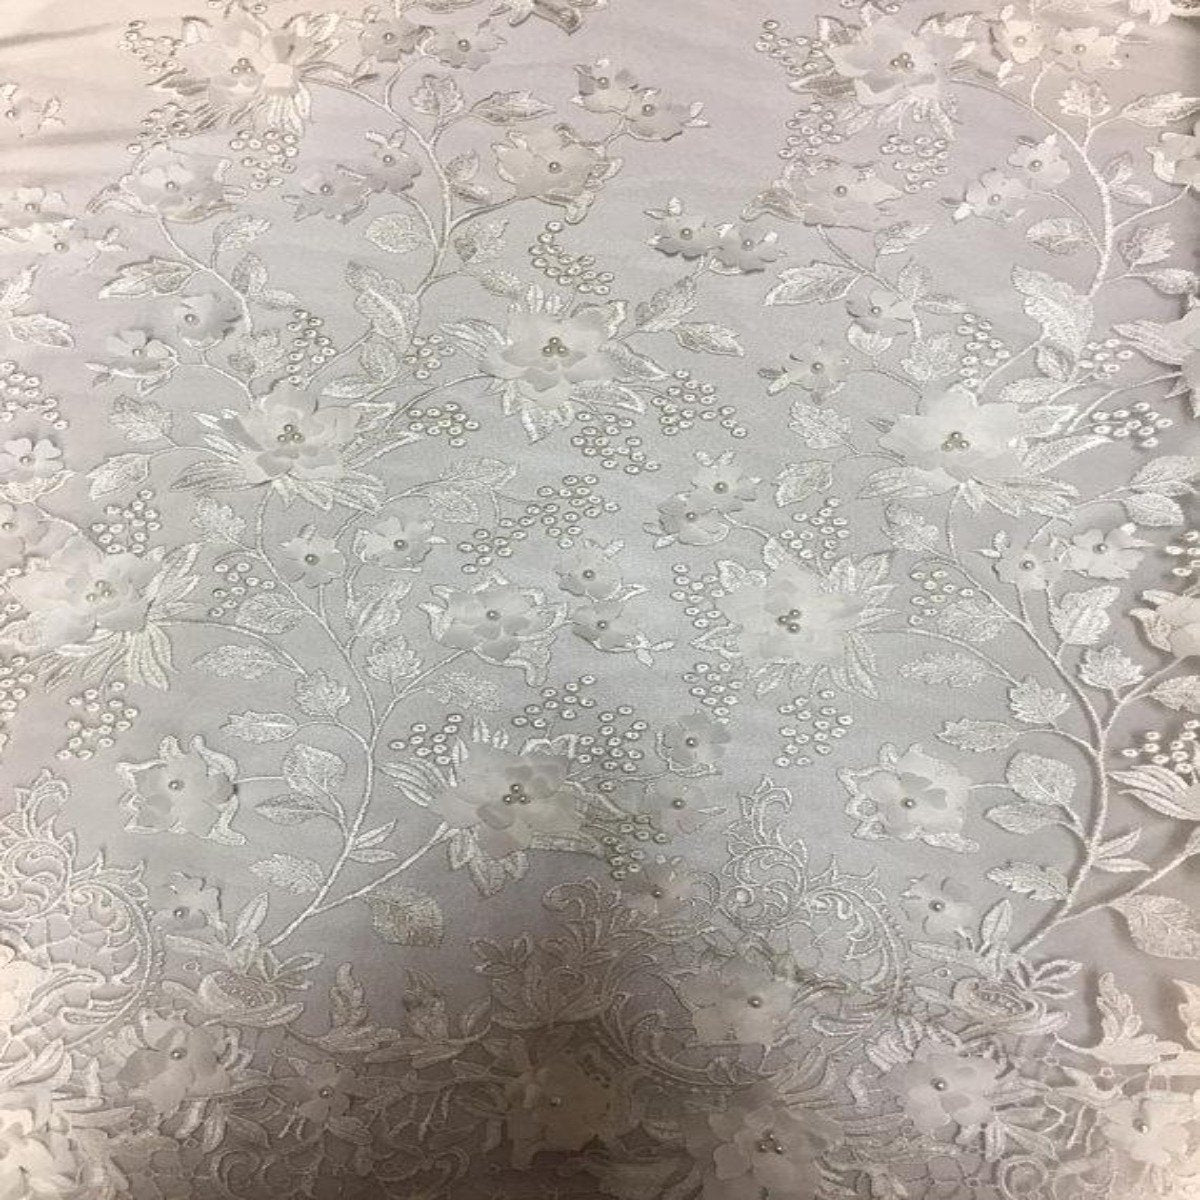 Beaded Floral Ivory Couture Lace Fabric by the Yard